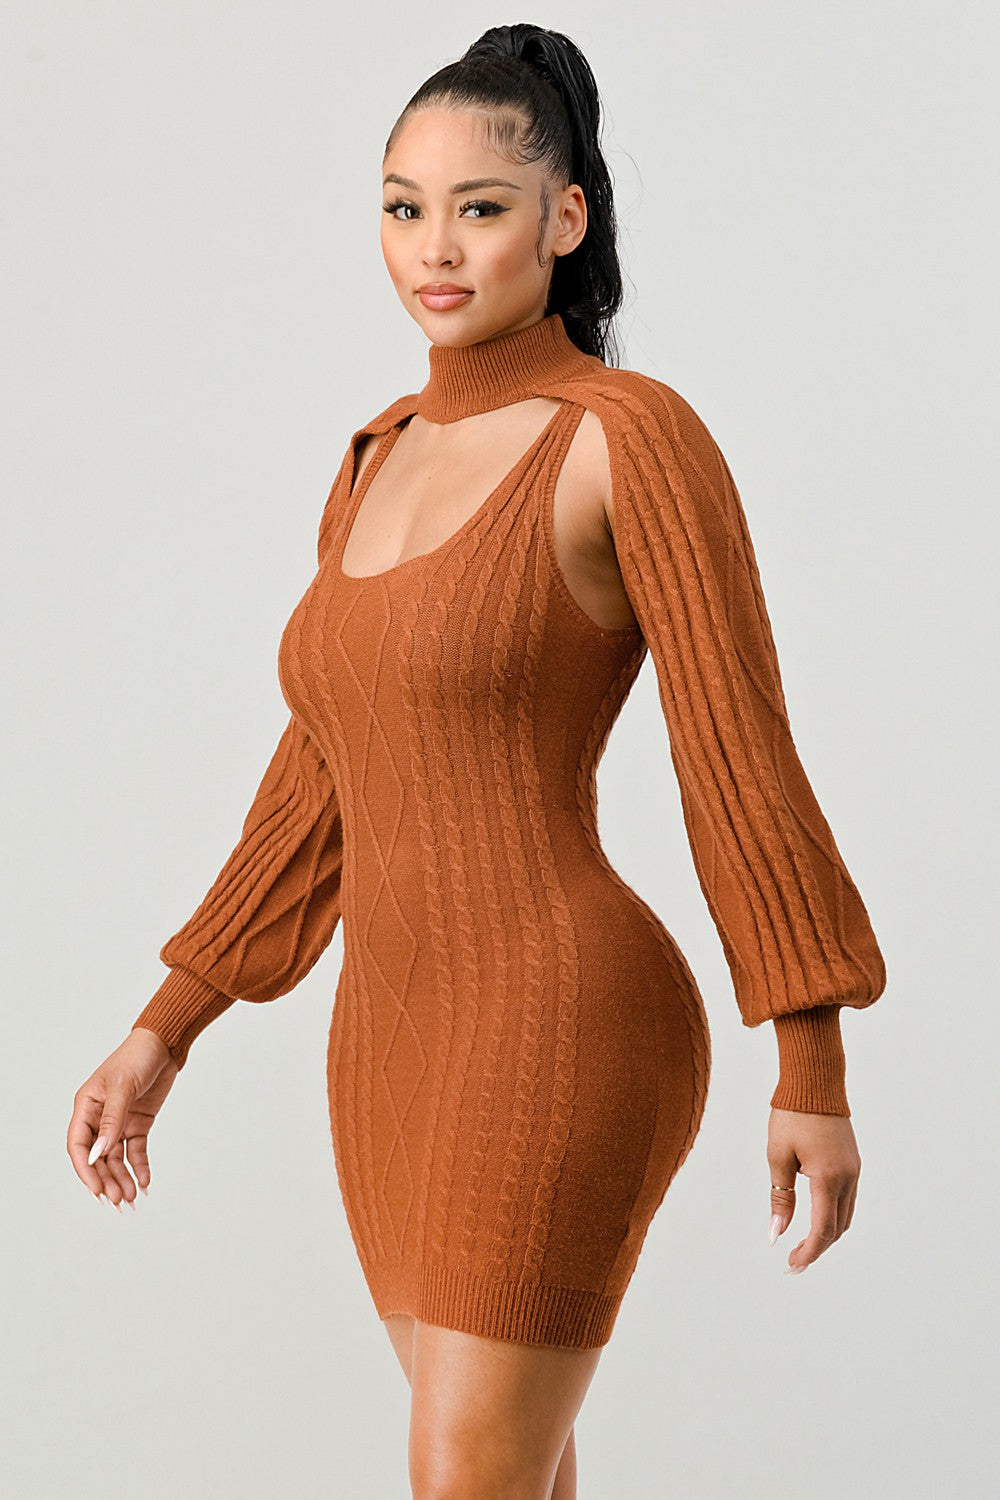 Chic & Comfy Brown Knit Two Piece Dress Set